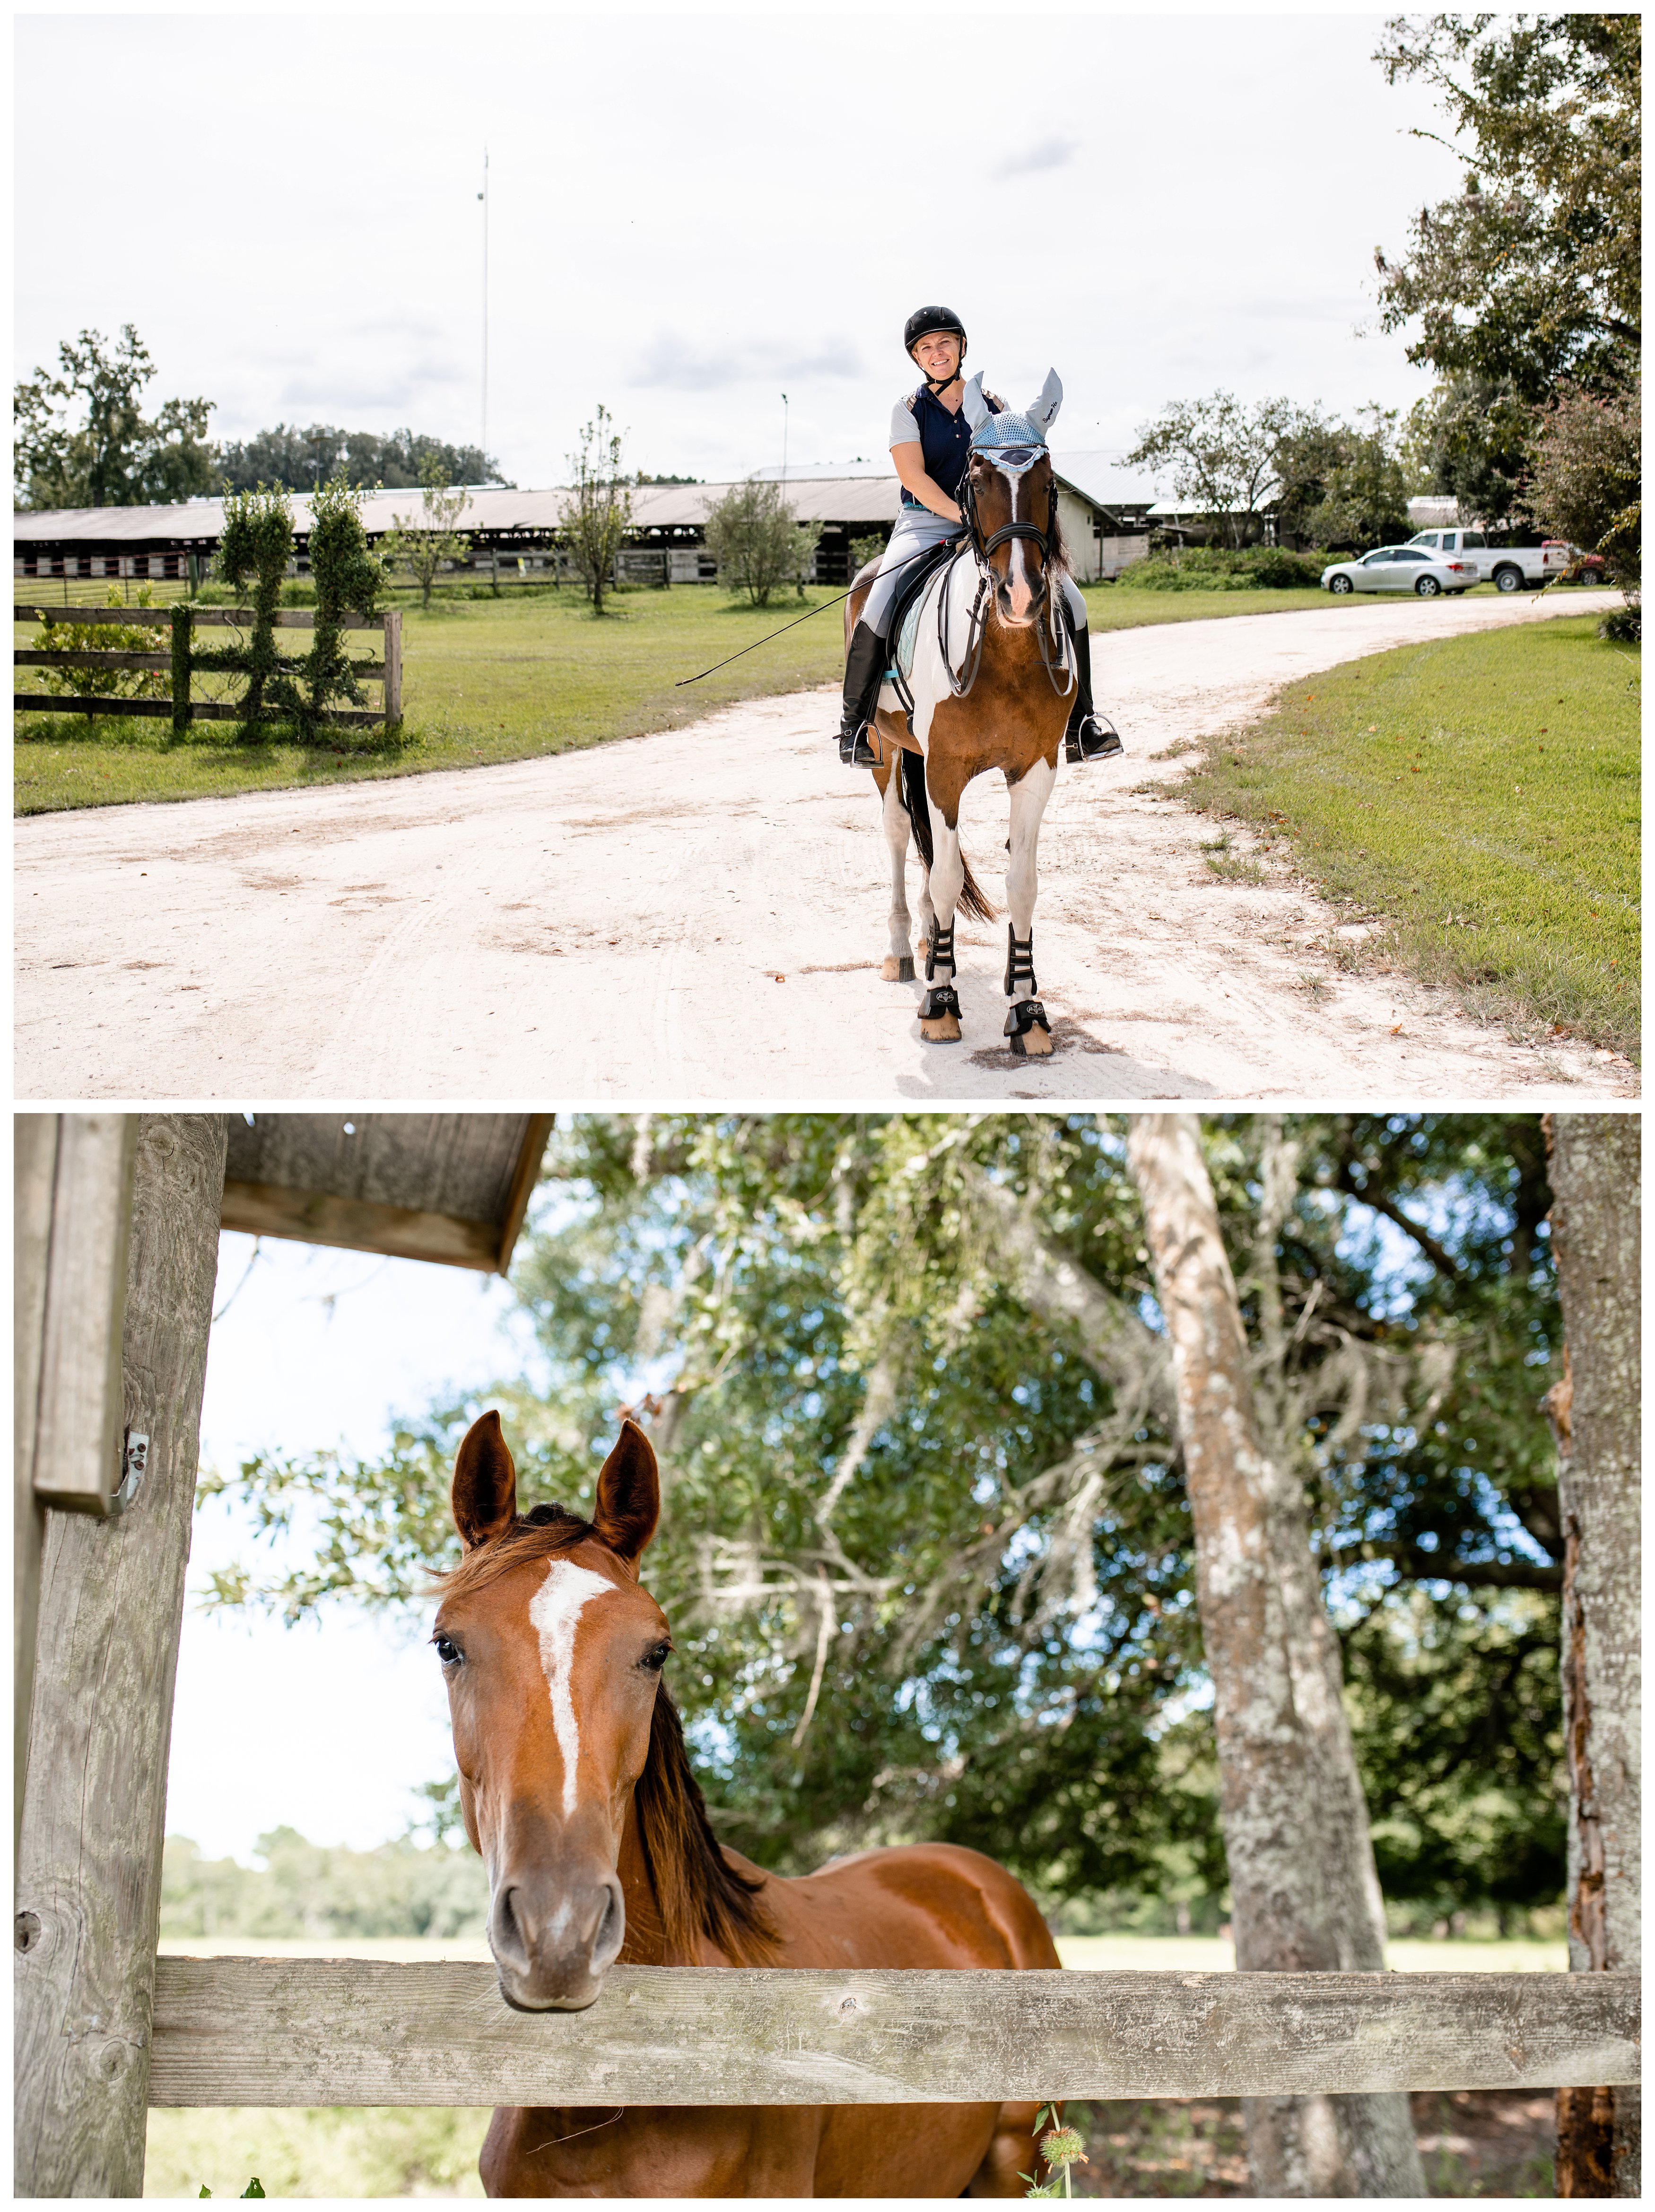 A few of the warmbloods at Valhalla Trakehners farm in Wellborn, Florida.